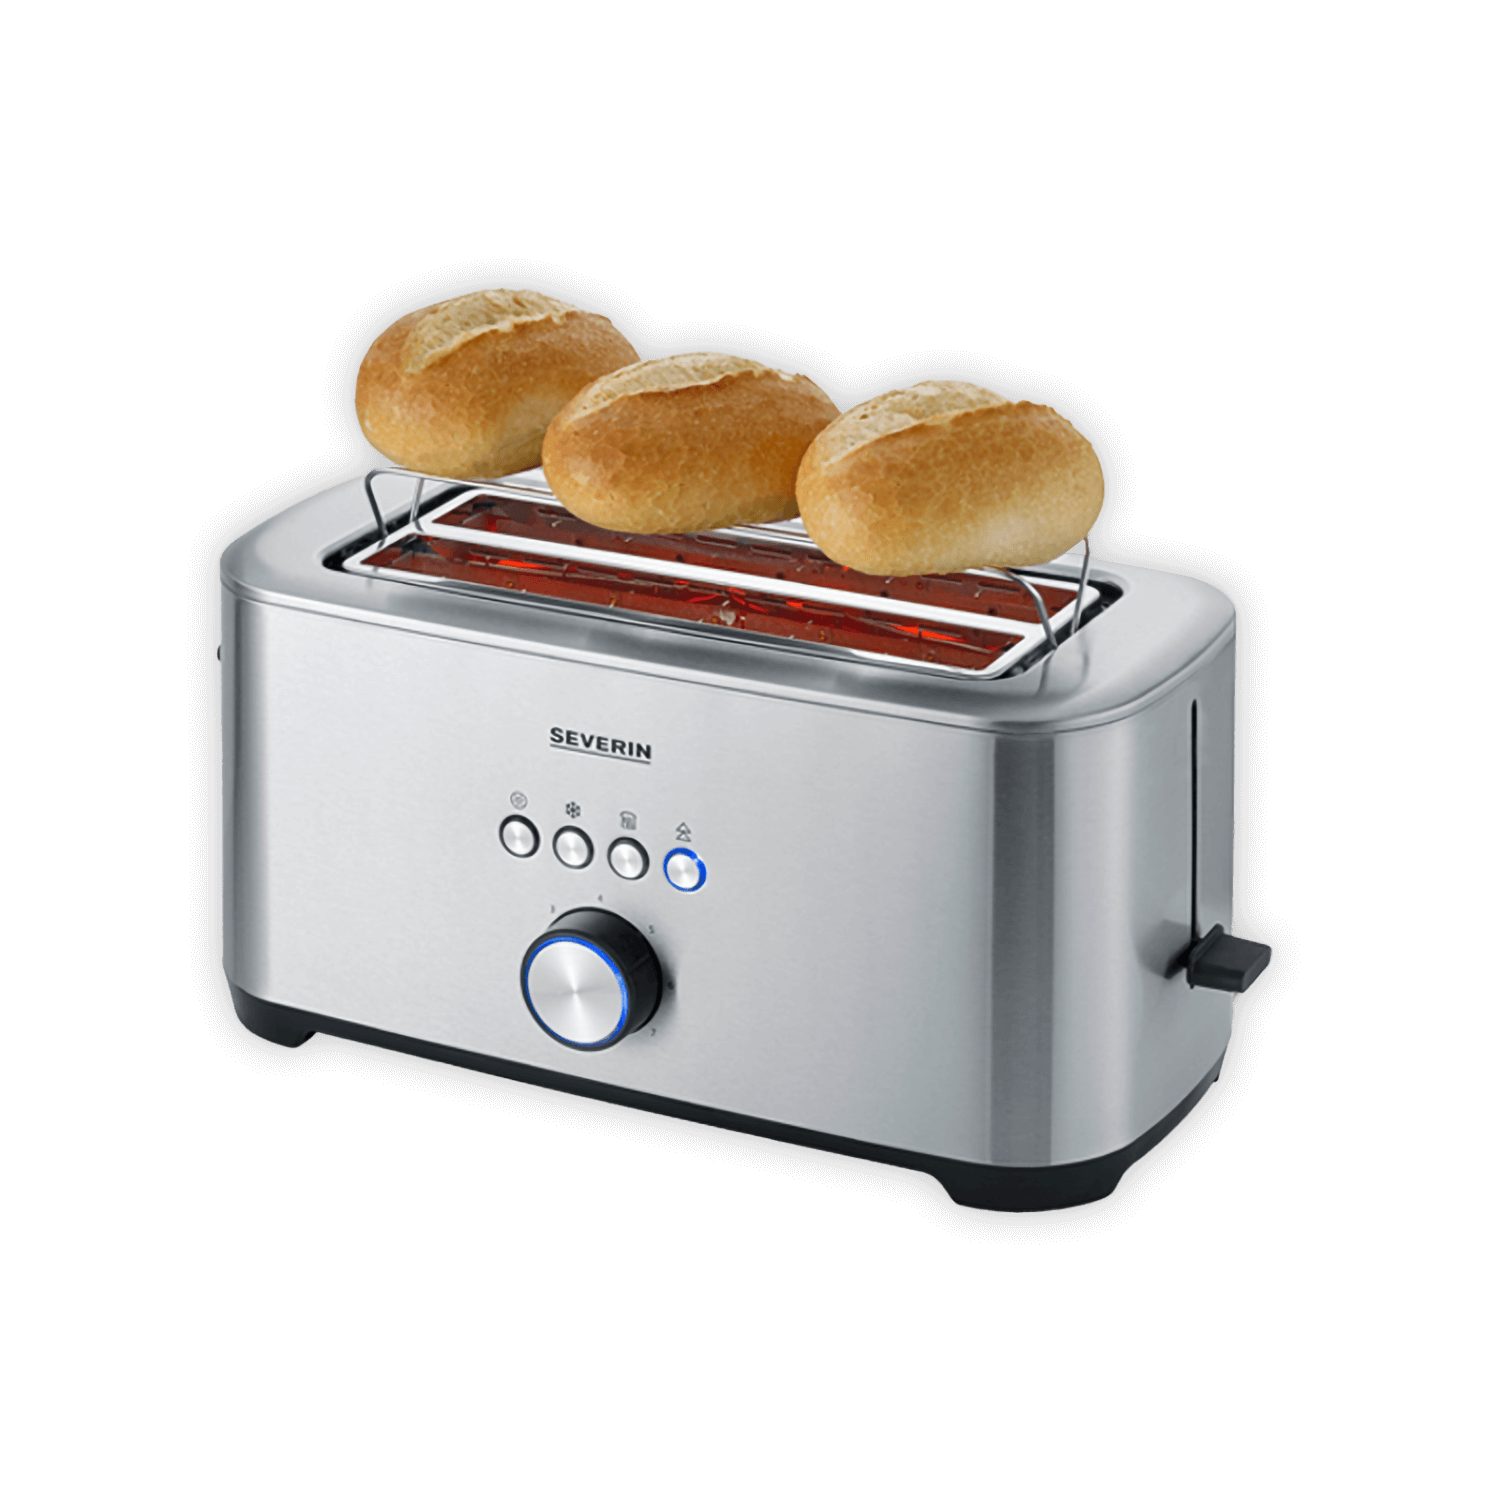 Severin Toaster AT 2621, 1.4 W